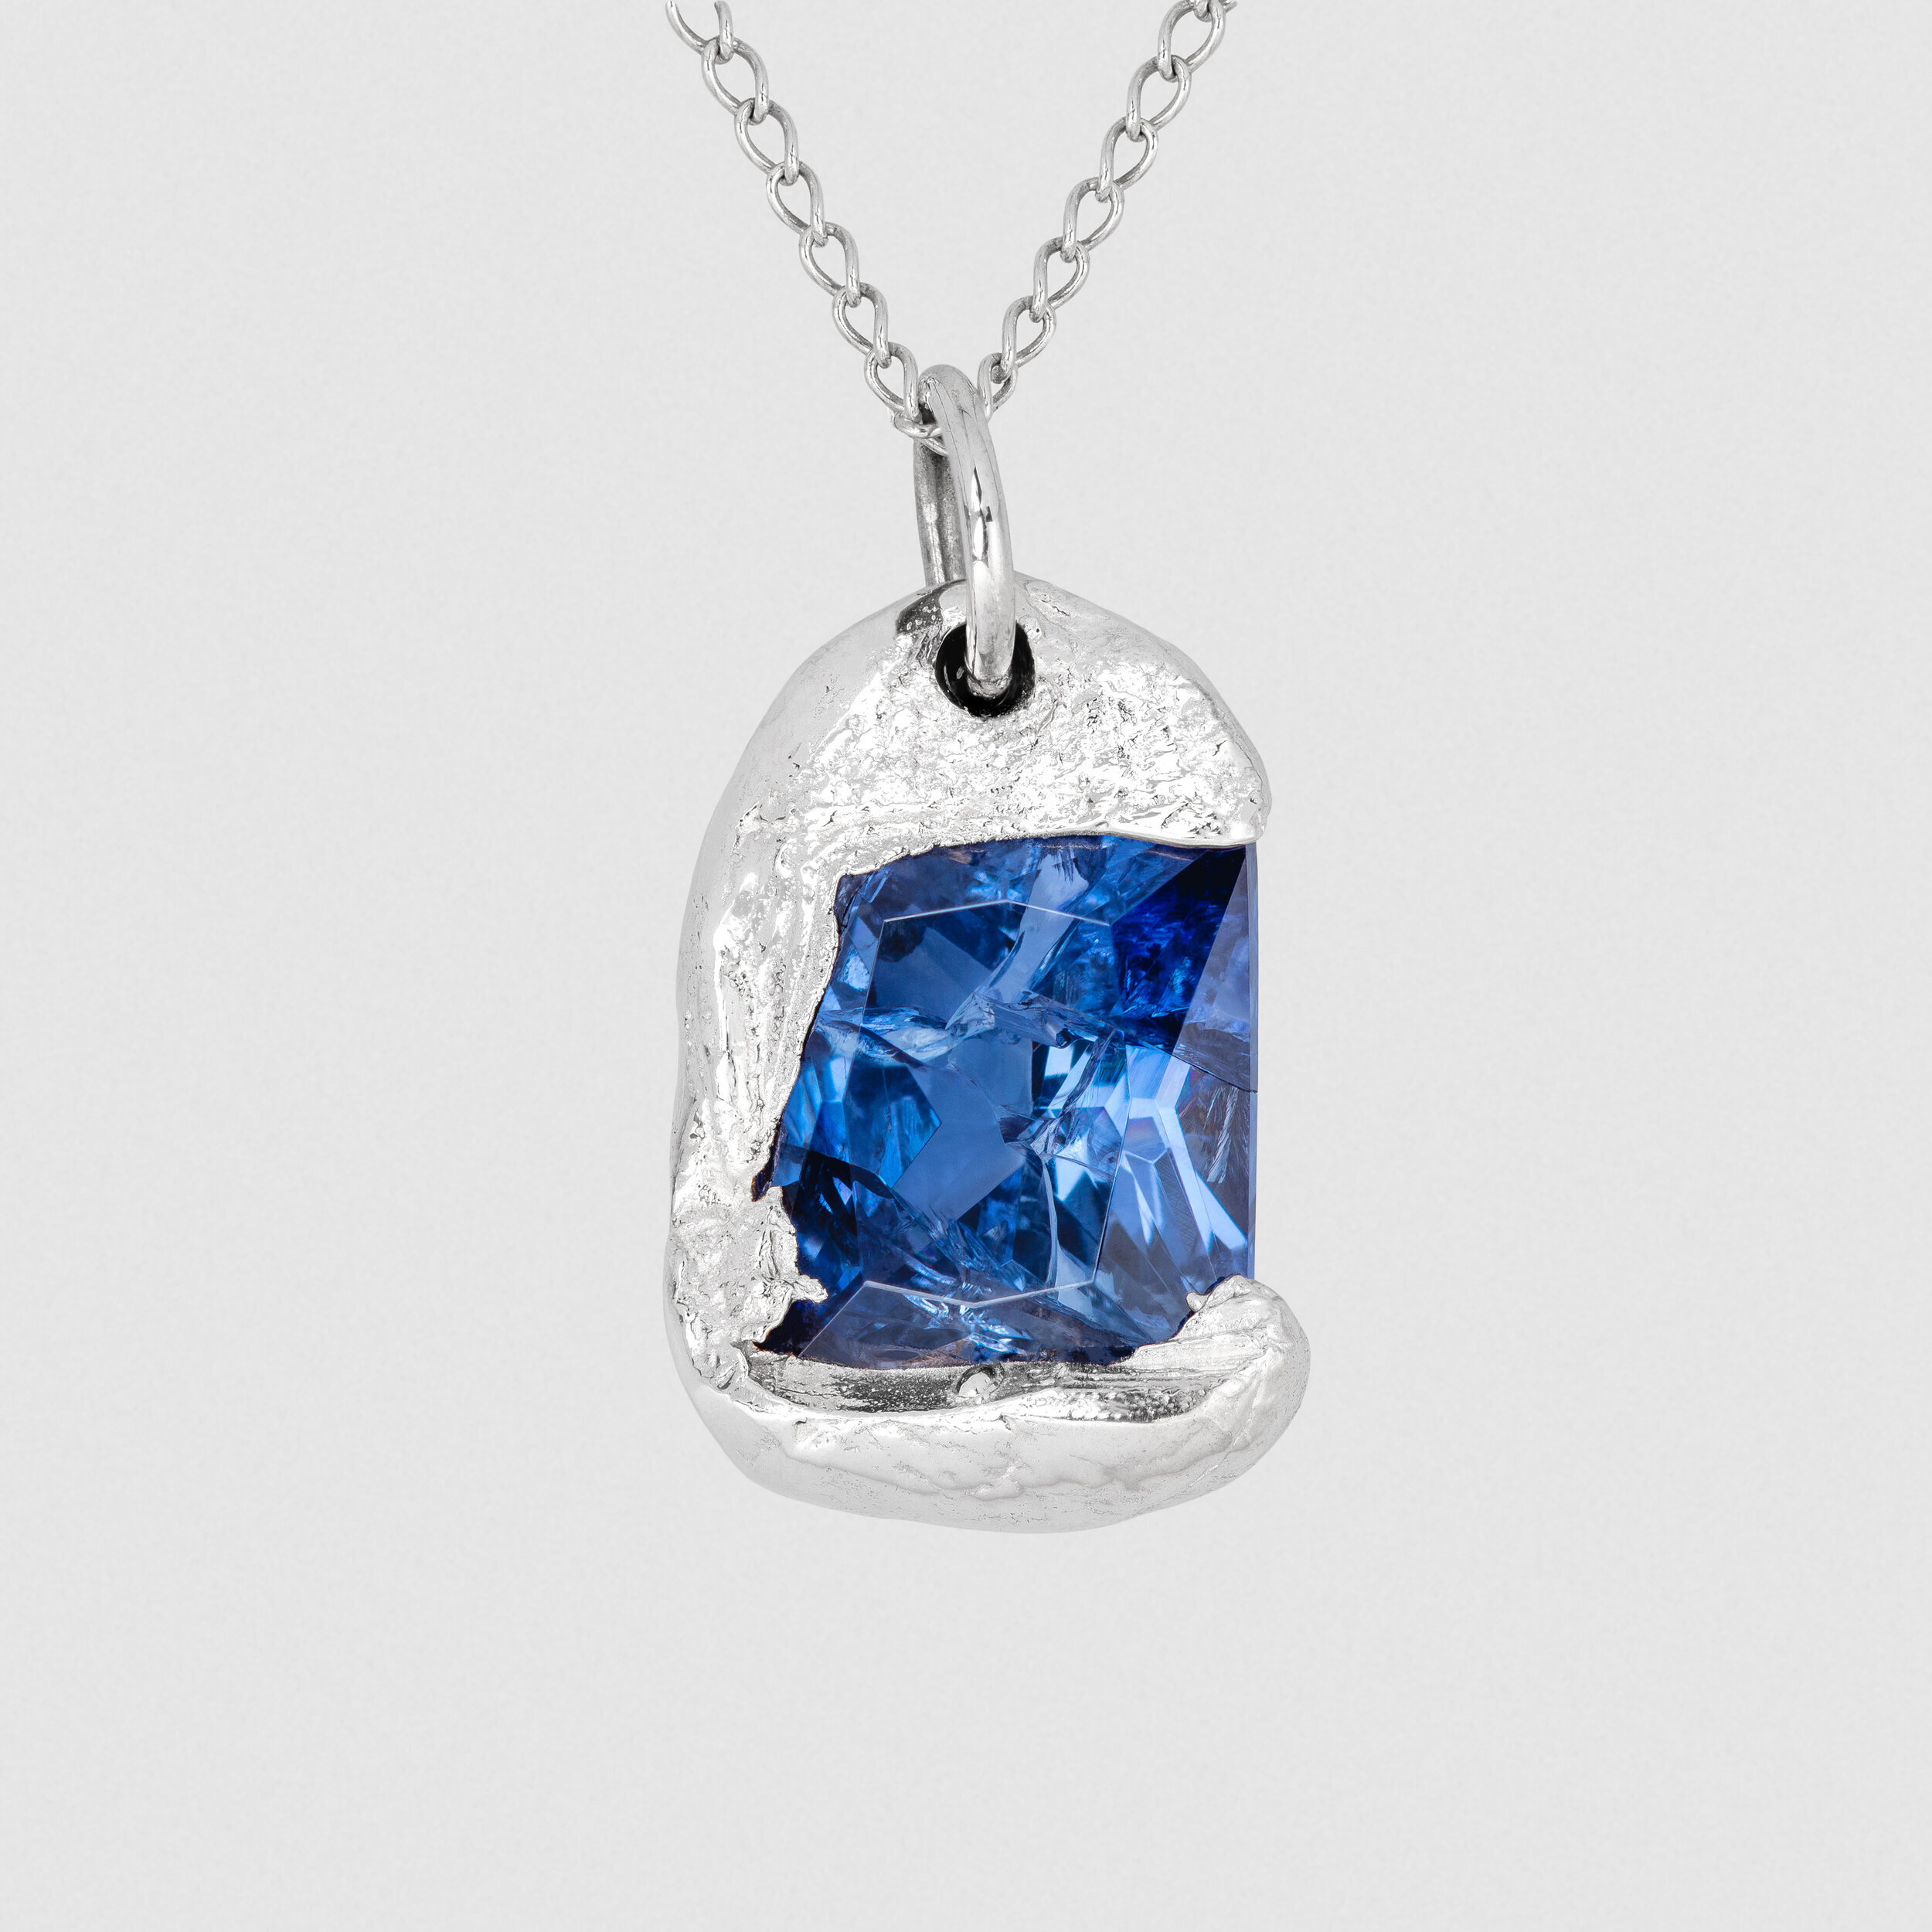 ROSE+PENDANT+-+SILVER+AND+BLUE+.jpg